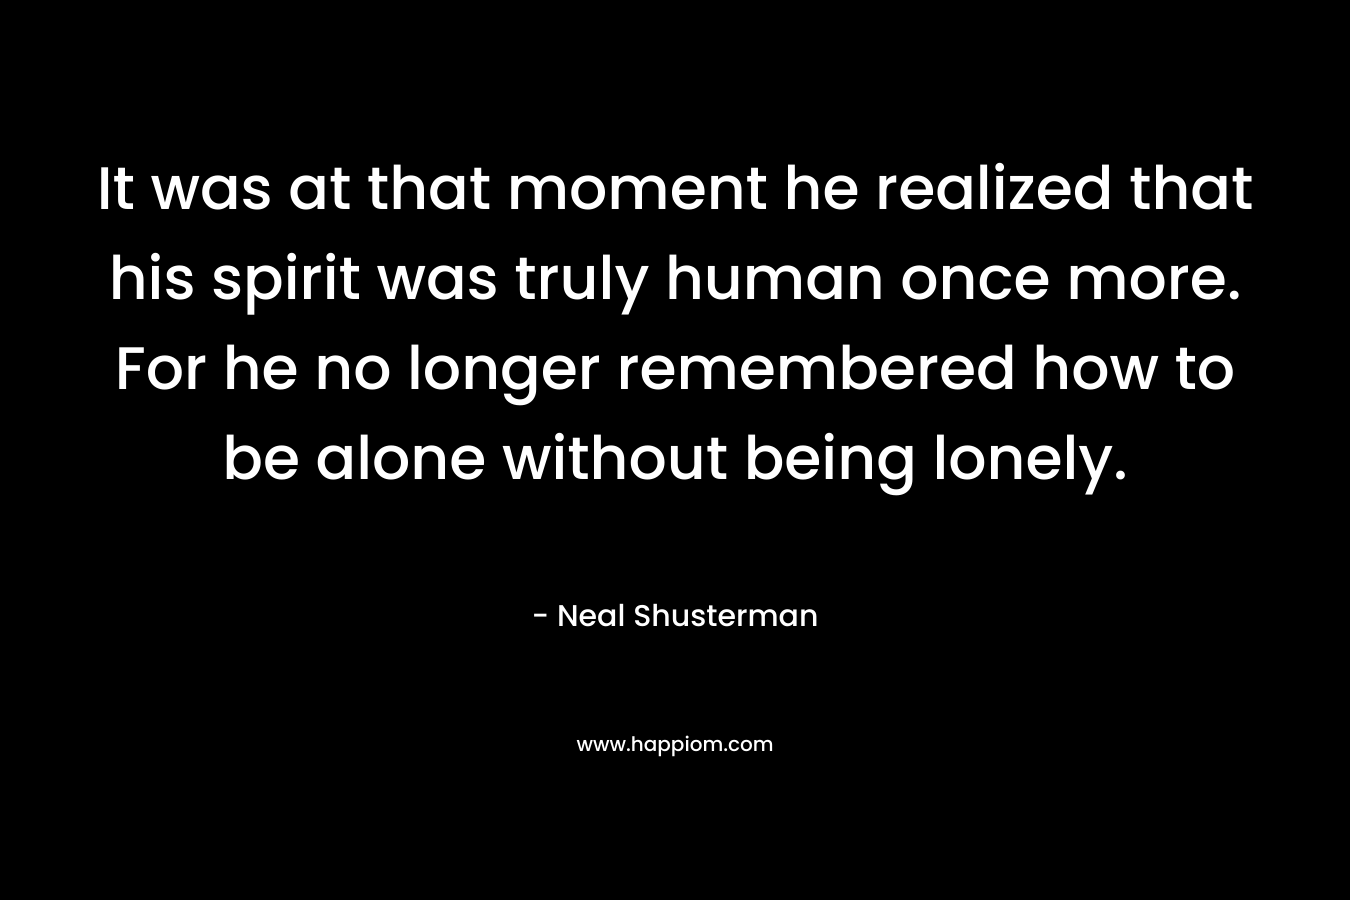 It was at that moment he realized that his spirit was truly human once more. For he no longer remembered how to be alone without being lonely.